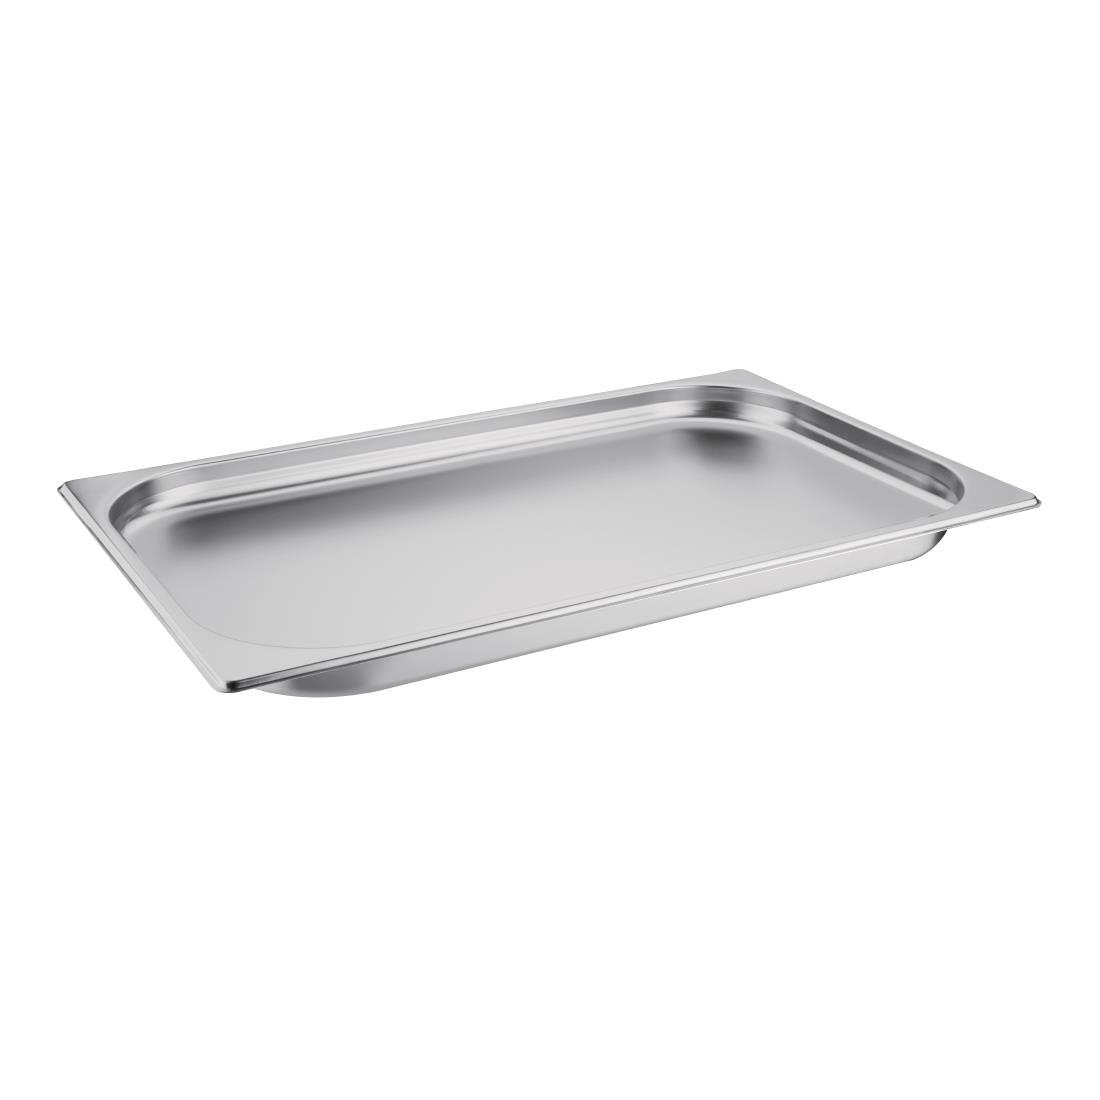 Stainless Steel 1/1 2cm Gastronorm Pan (K998)